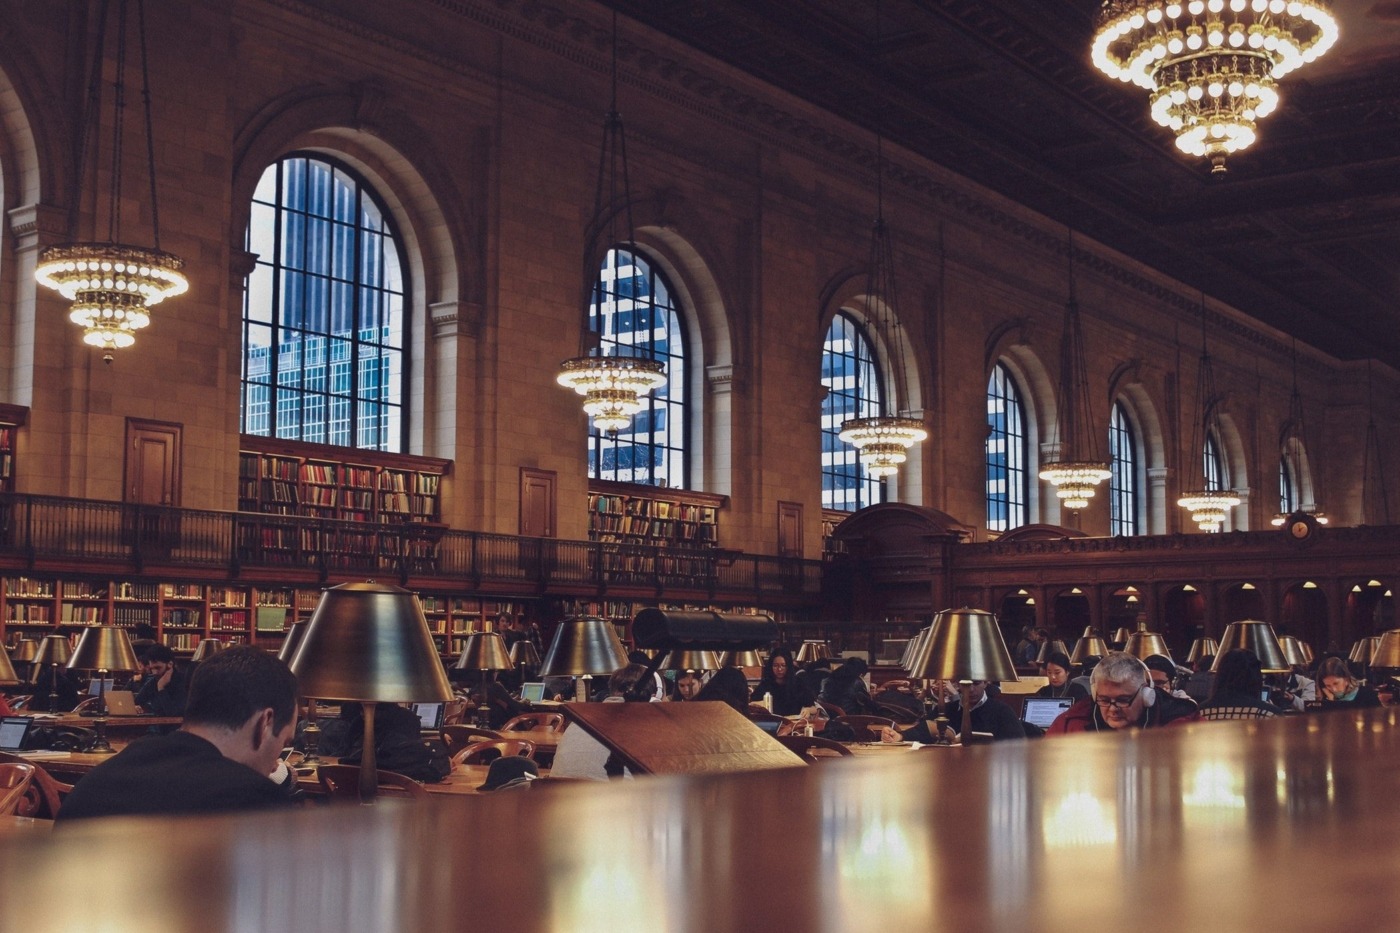 New York public library inside view. People studying.